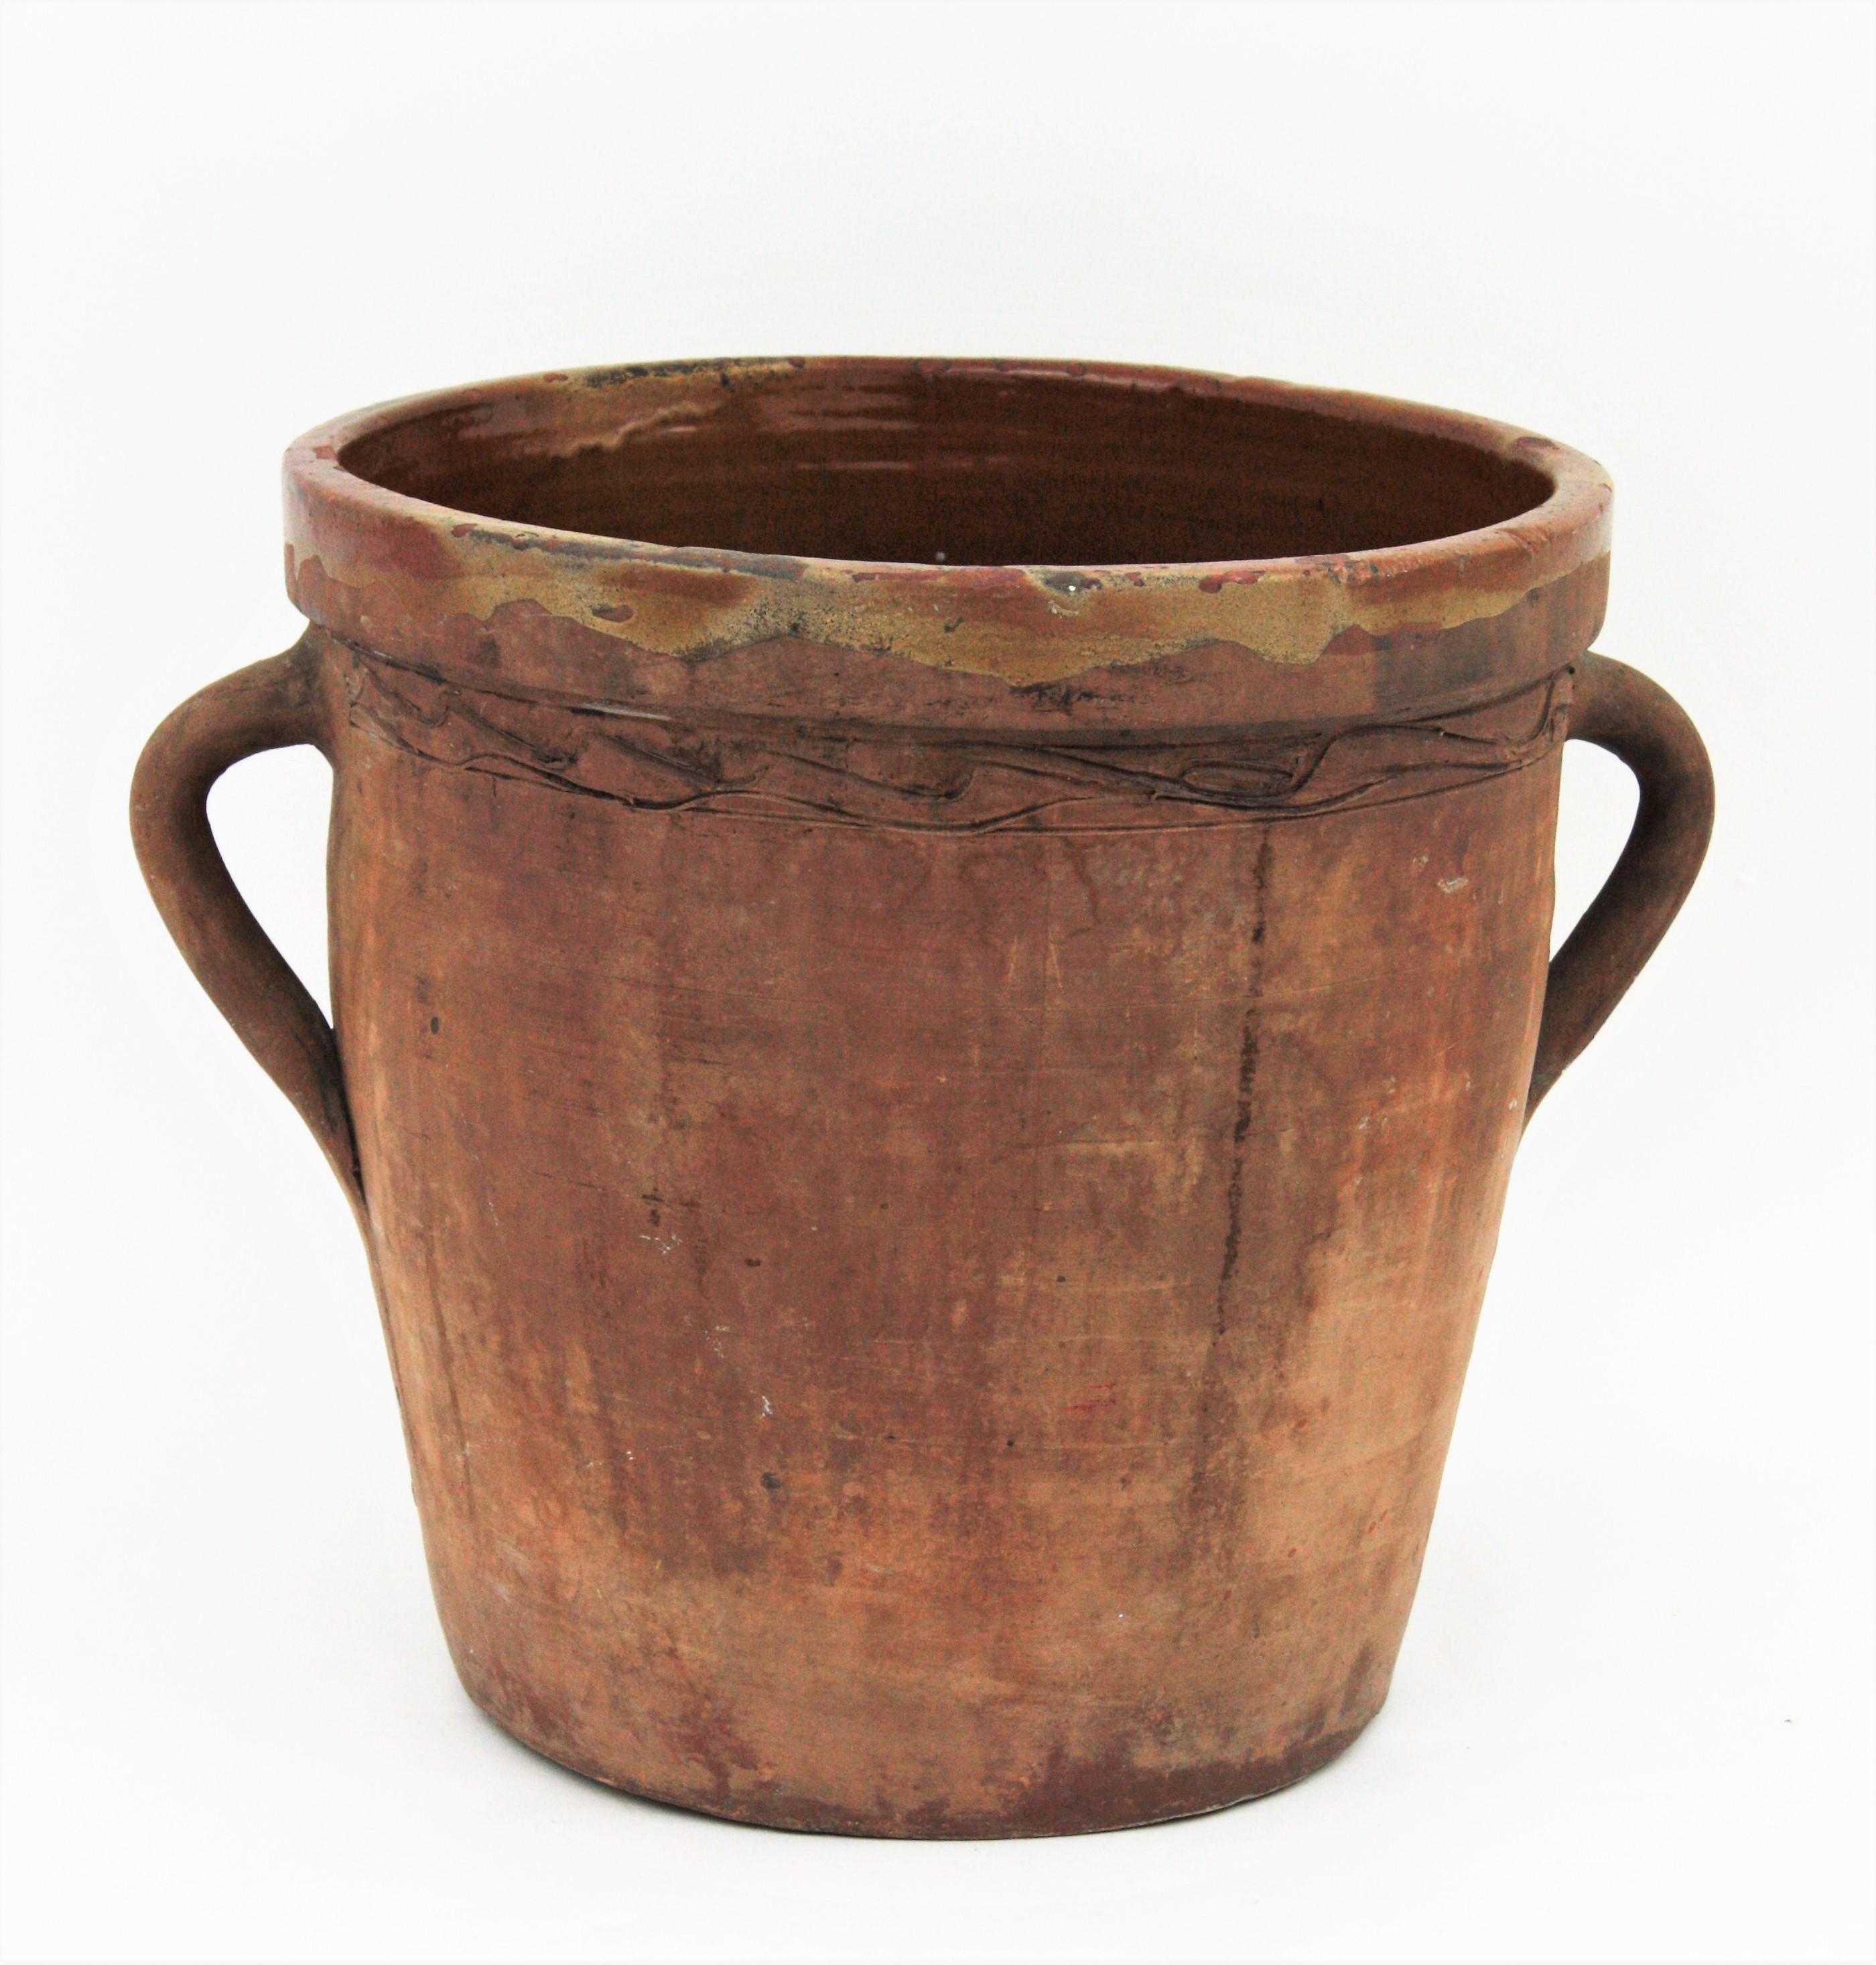 Handmade terracotta preserving pot or jar with handles from Granada, Spain, 19th century.
Traditional Spanish ceramic cheese jar 'orza quesera'. Unglazed exterior with handles at both sides and brown glaze at the interior to preserve cheese. It has